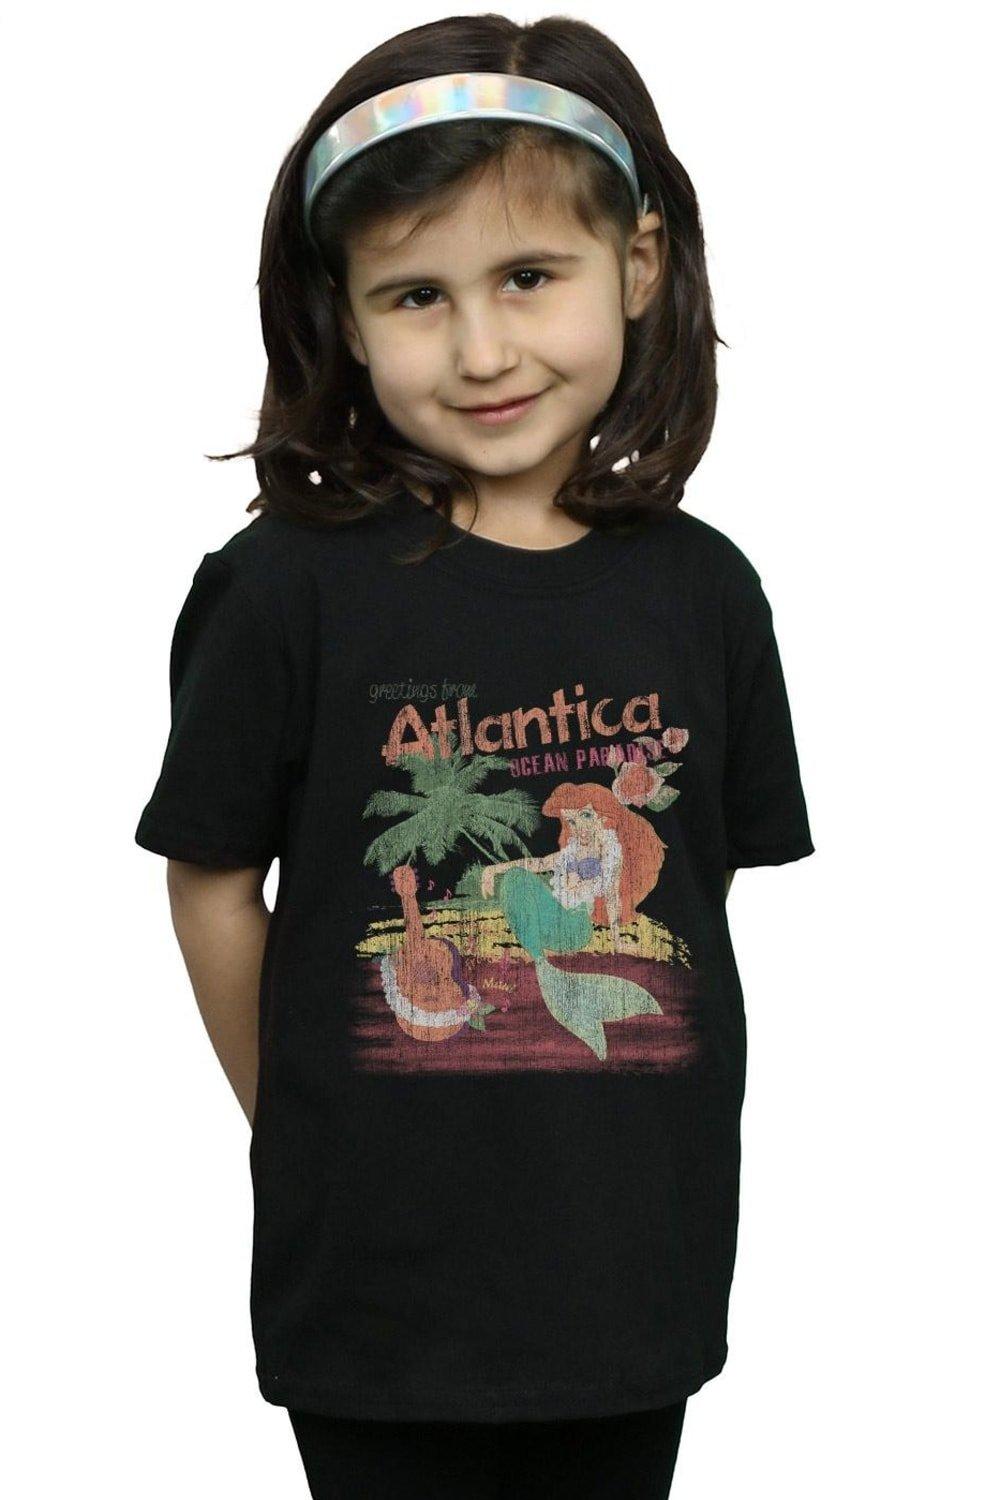 The Little Mermaid Greetings From Atlantica Cotton T-Shirt